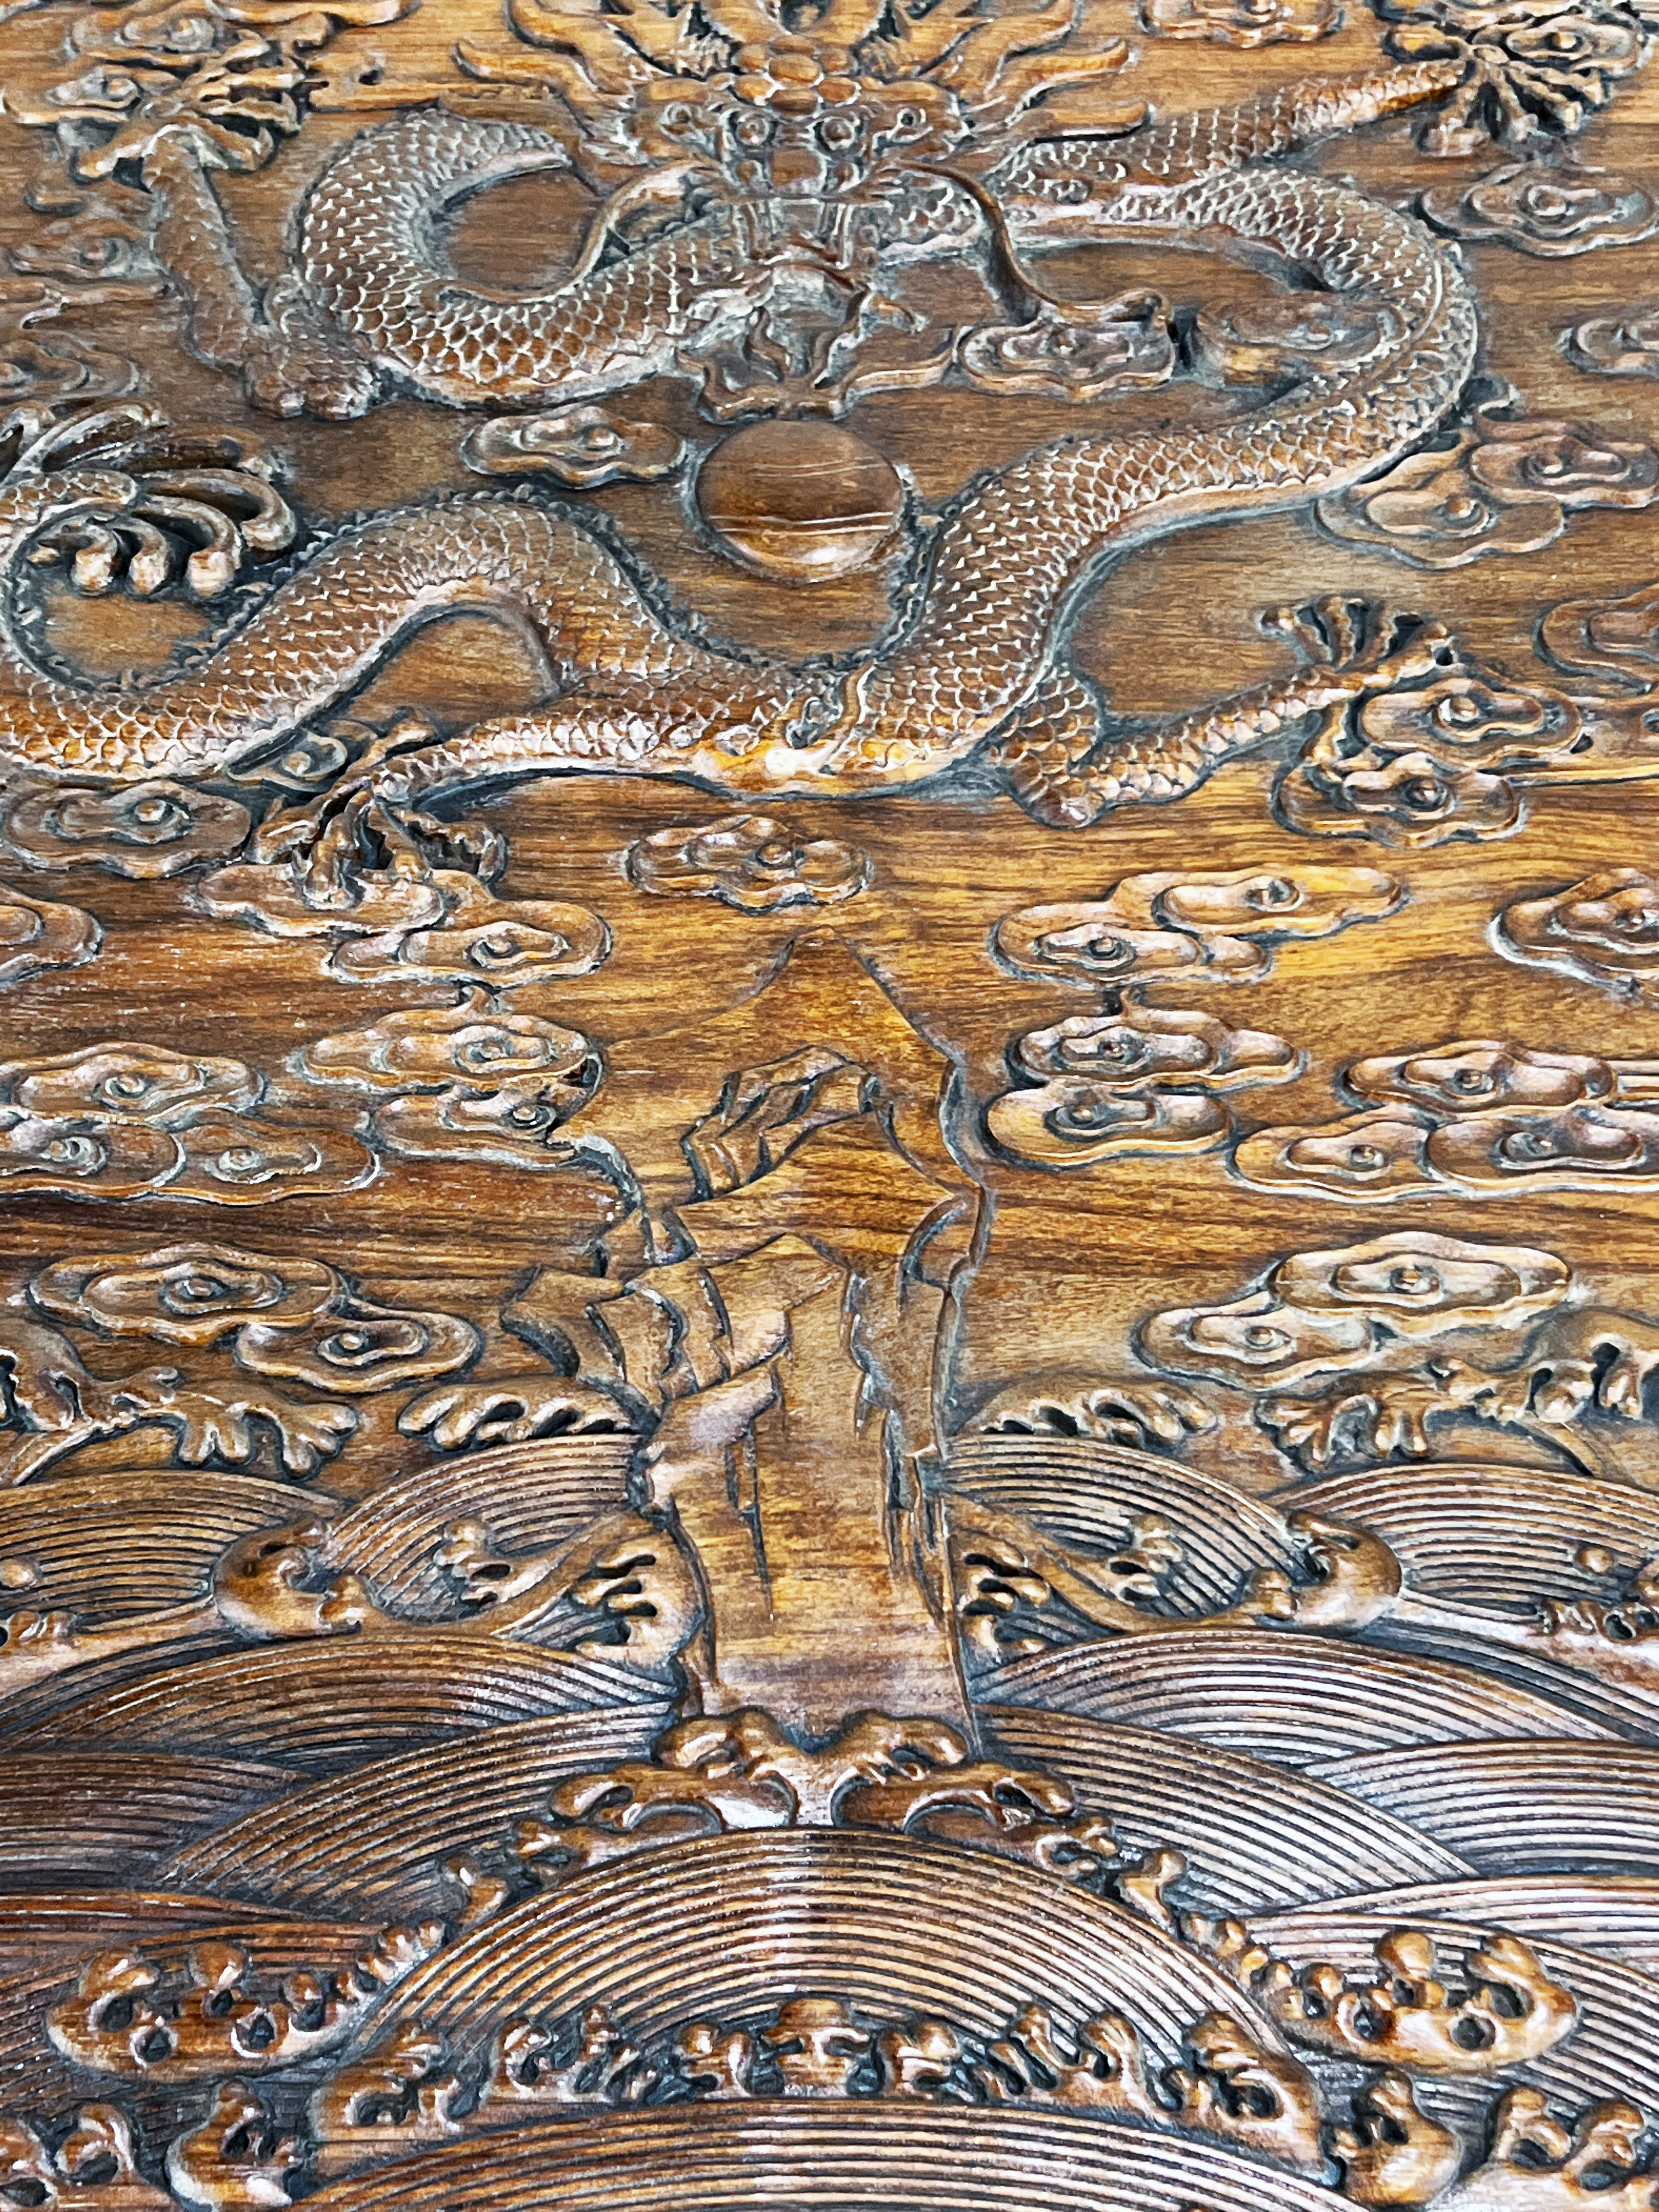 Exquisite Chinese Huanghuali Dragon Table With Detailed Carving image 2